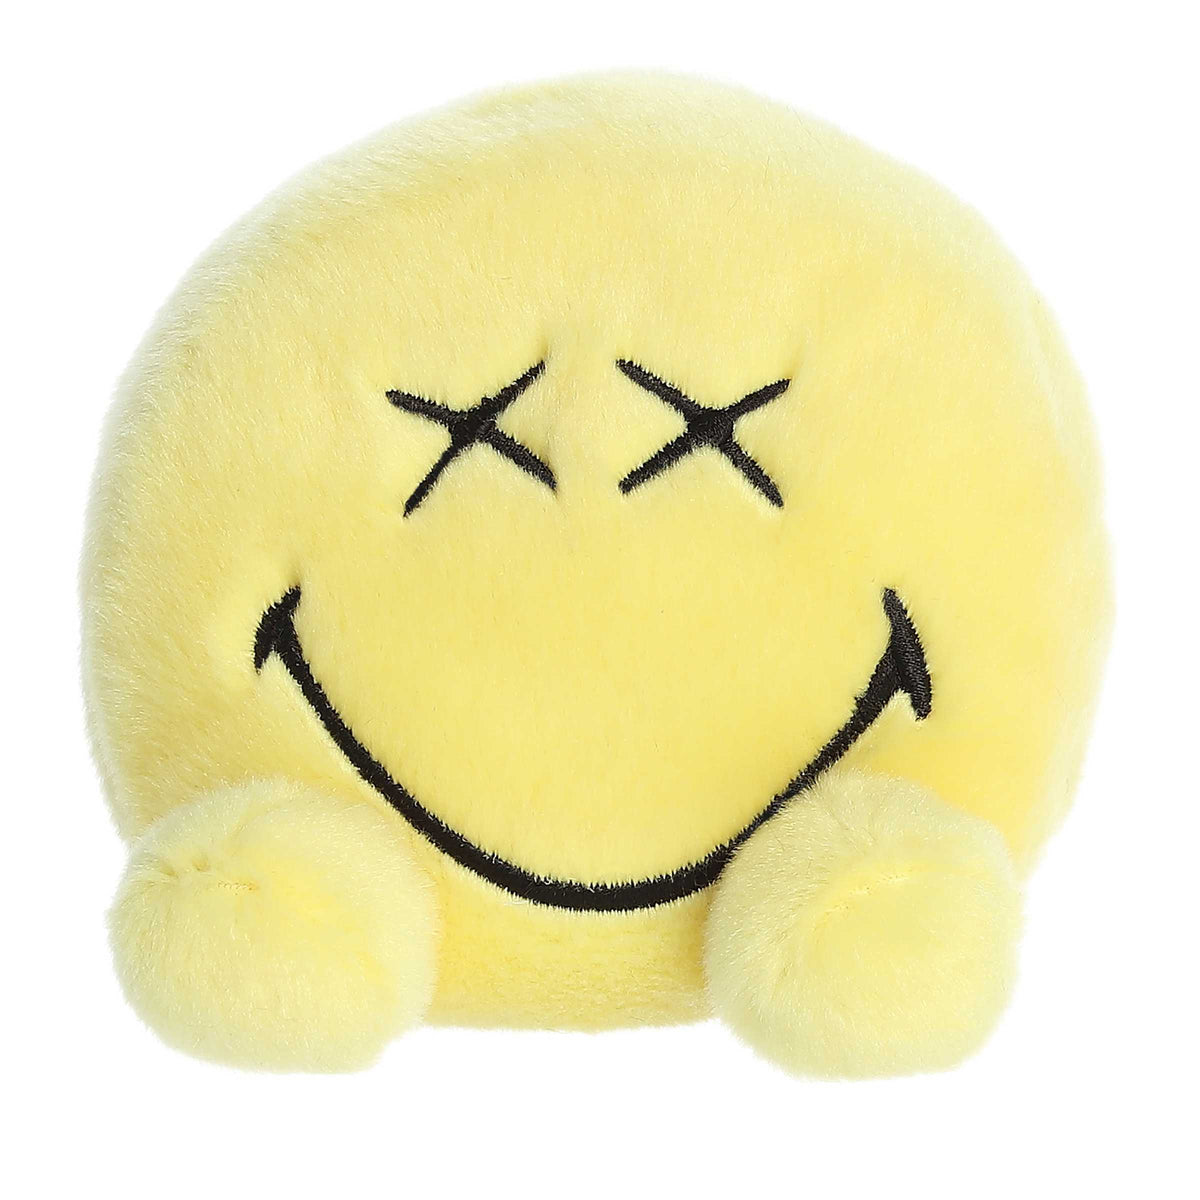 SmileyWorld Wild Guy plush, sunny yellow with Xs for eyes and a big smile, embodying pure happiness